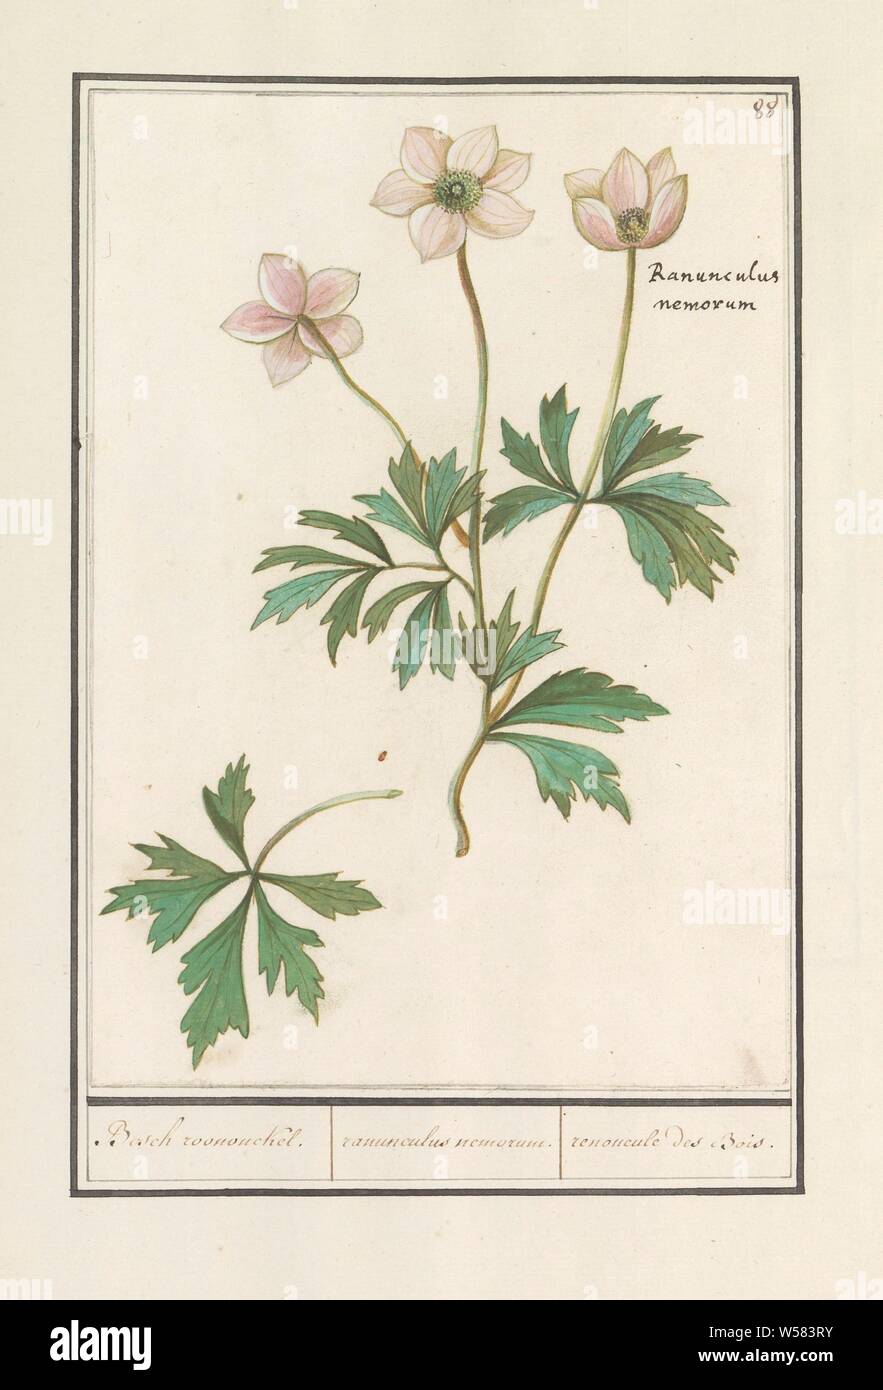 Wood anemone (Anemone nemorosa), Bosch roononckel. / ranunculus nemorum. / ranoncule des Bois (title on object), White forest anemone. Numbered top right: 88. With the Latin name. Part of the first album with drawings of flowers and plants. Eighth of twelve albums with drawings of animals, birds and plants known around 1600, commissioned by Emperor Rudolf II. With explanation in Dutch, Latin and French, Anselmus Boetius de Boodt, 1596 - 1610, paper, watercolor (paint), deck paint, chalk, ink, pen, h 240 mm × w 169 mm Stock Photo